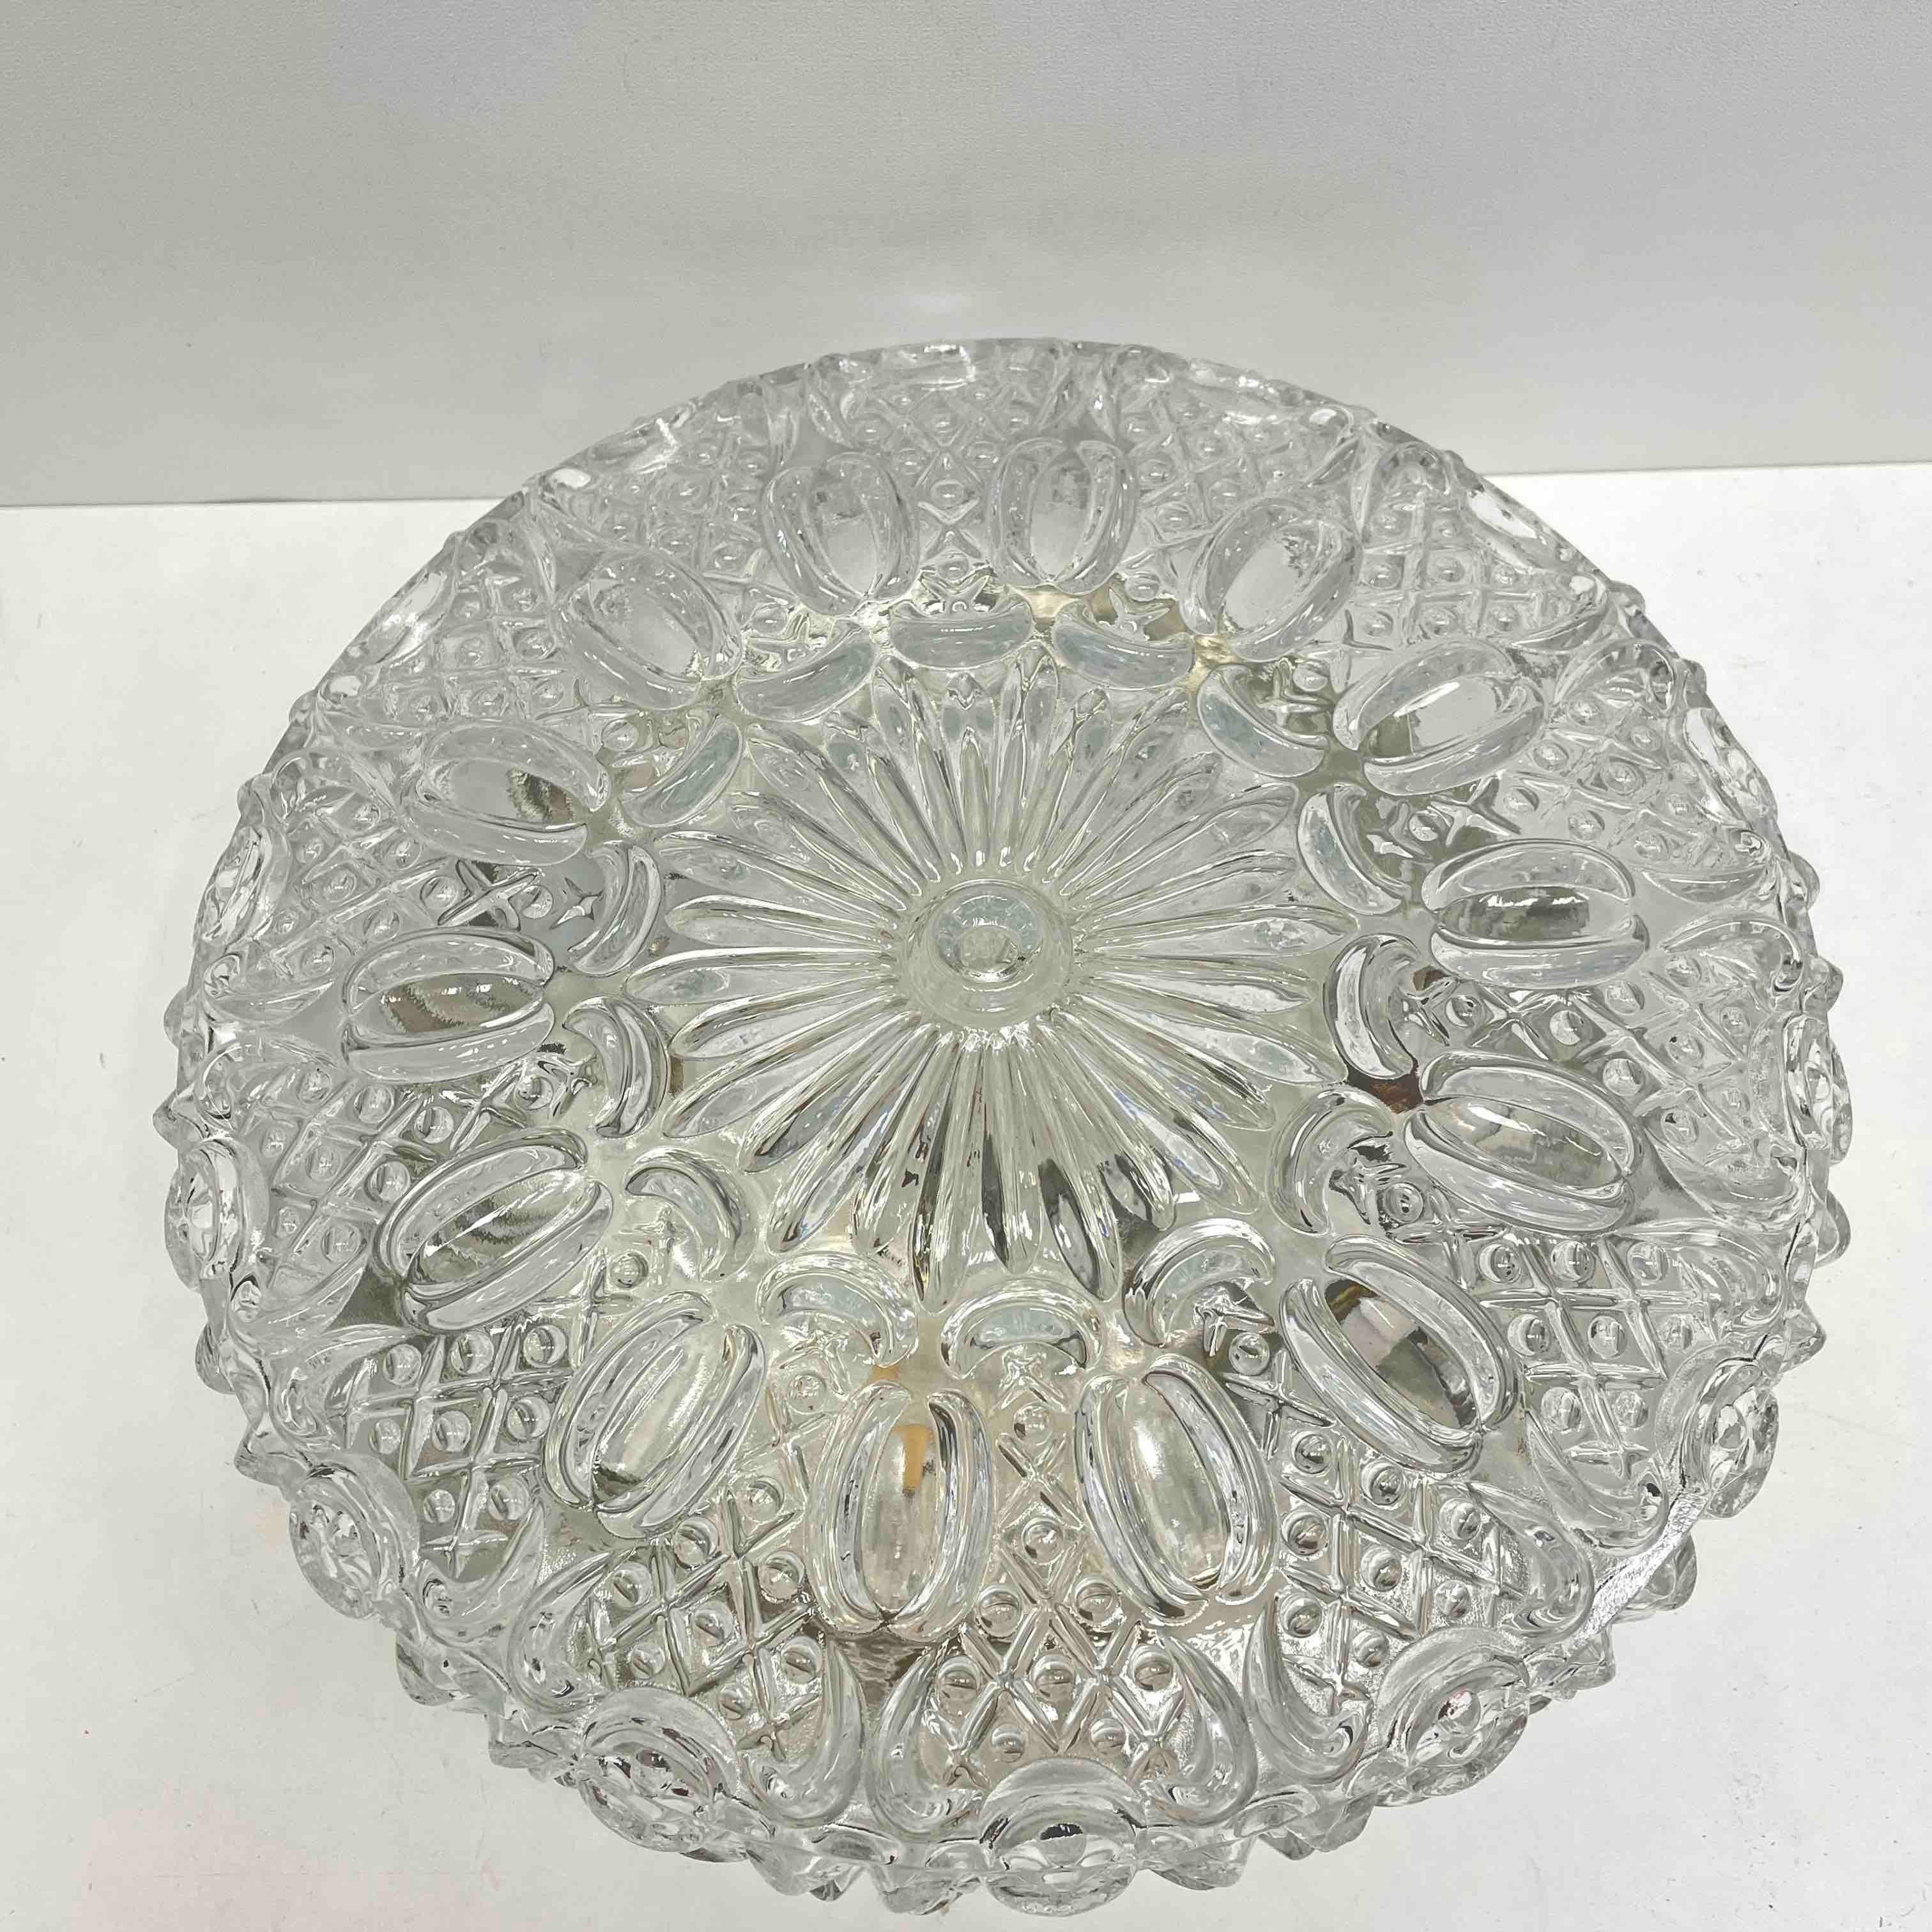 Beautiful bubble glass pattern flush mount. Made in Germany by Glashütte Limburg. Gorgeous textured glass flush mount with metal fixture. The fixture requires one European E27 Edison or Medium bulb up to 100 watts.